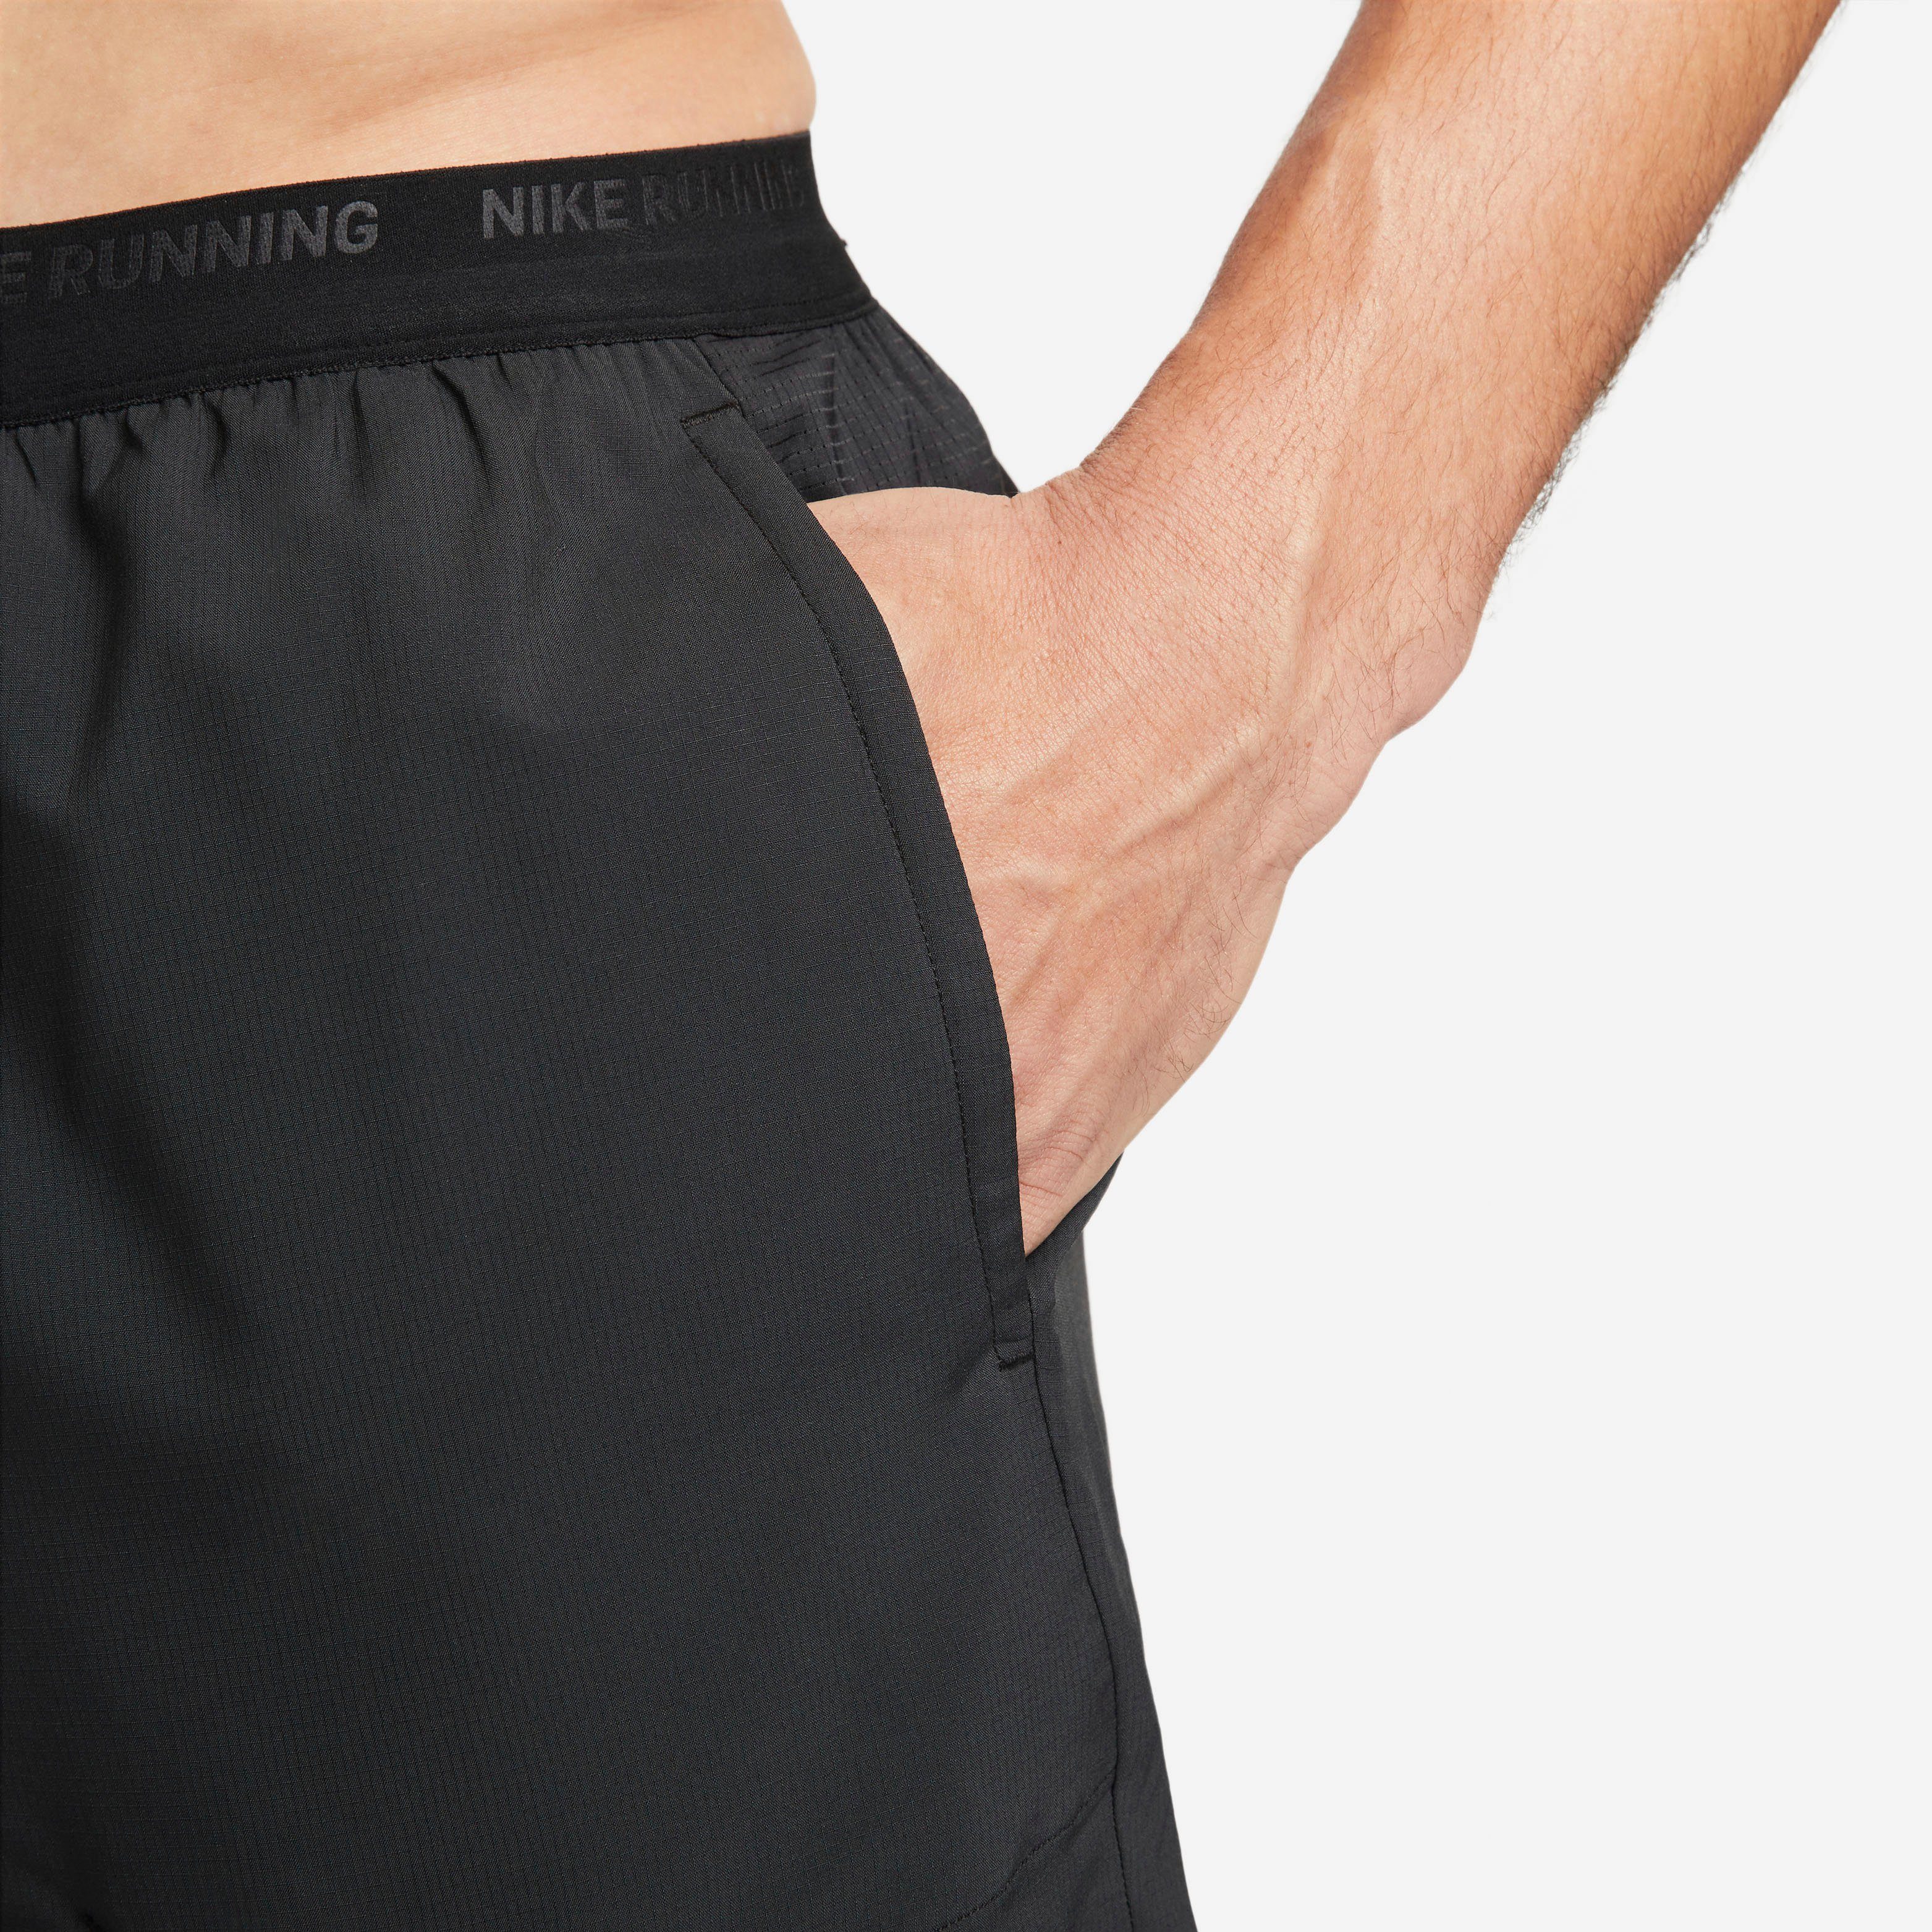 Laufshorts Nike Shorts Men's Stride Brief-Lined Running Dri-FIT "